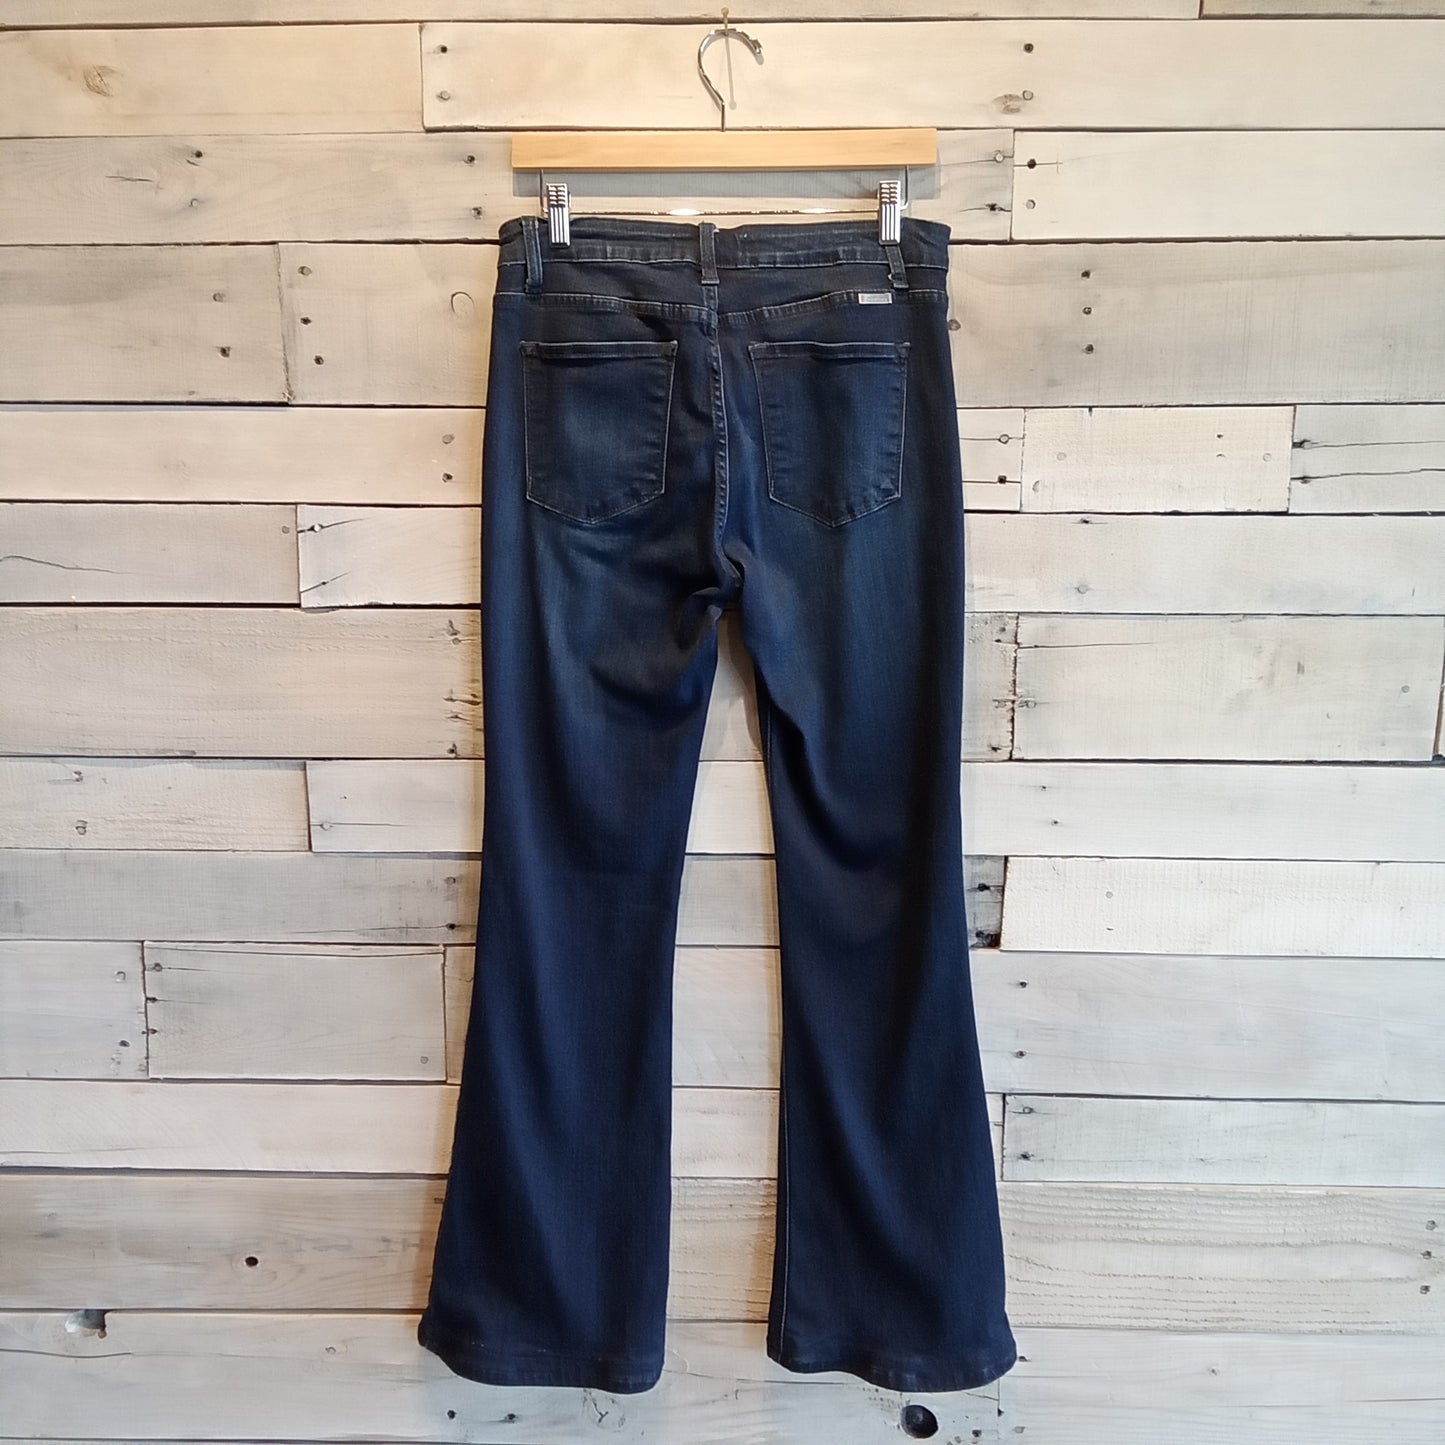 Kan Can Flare Jeans Size 29